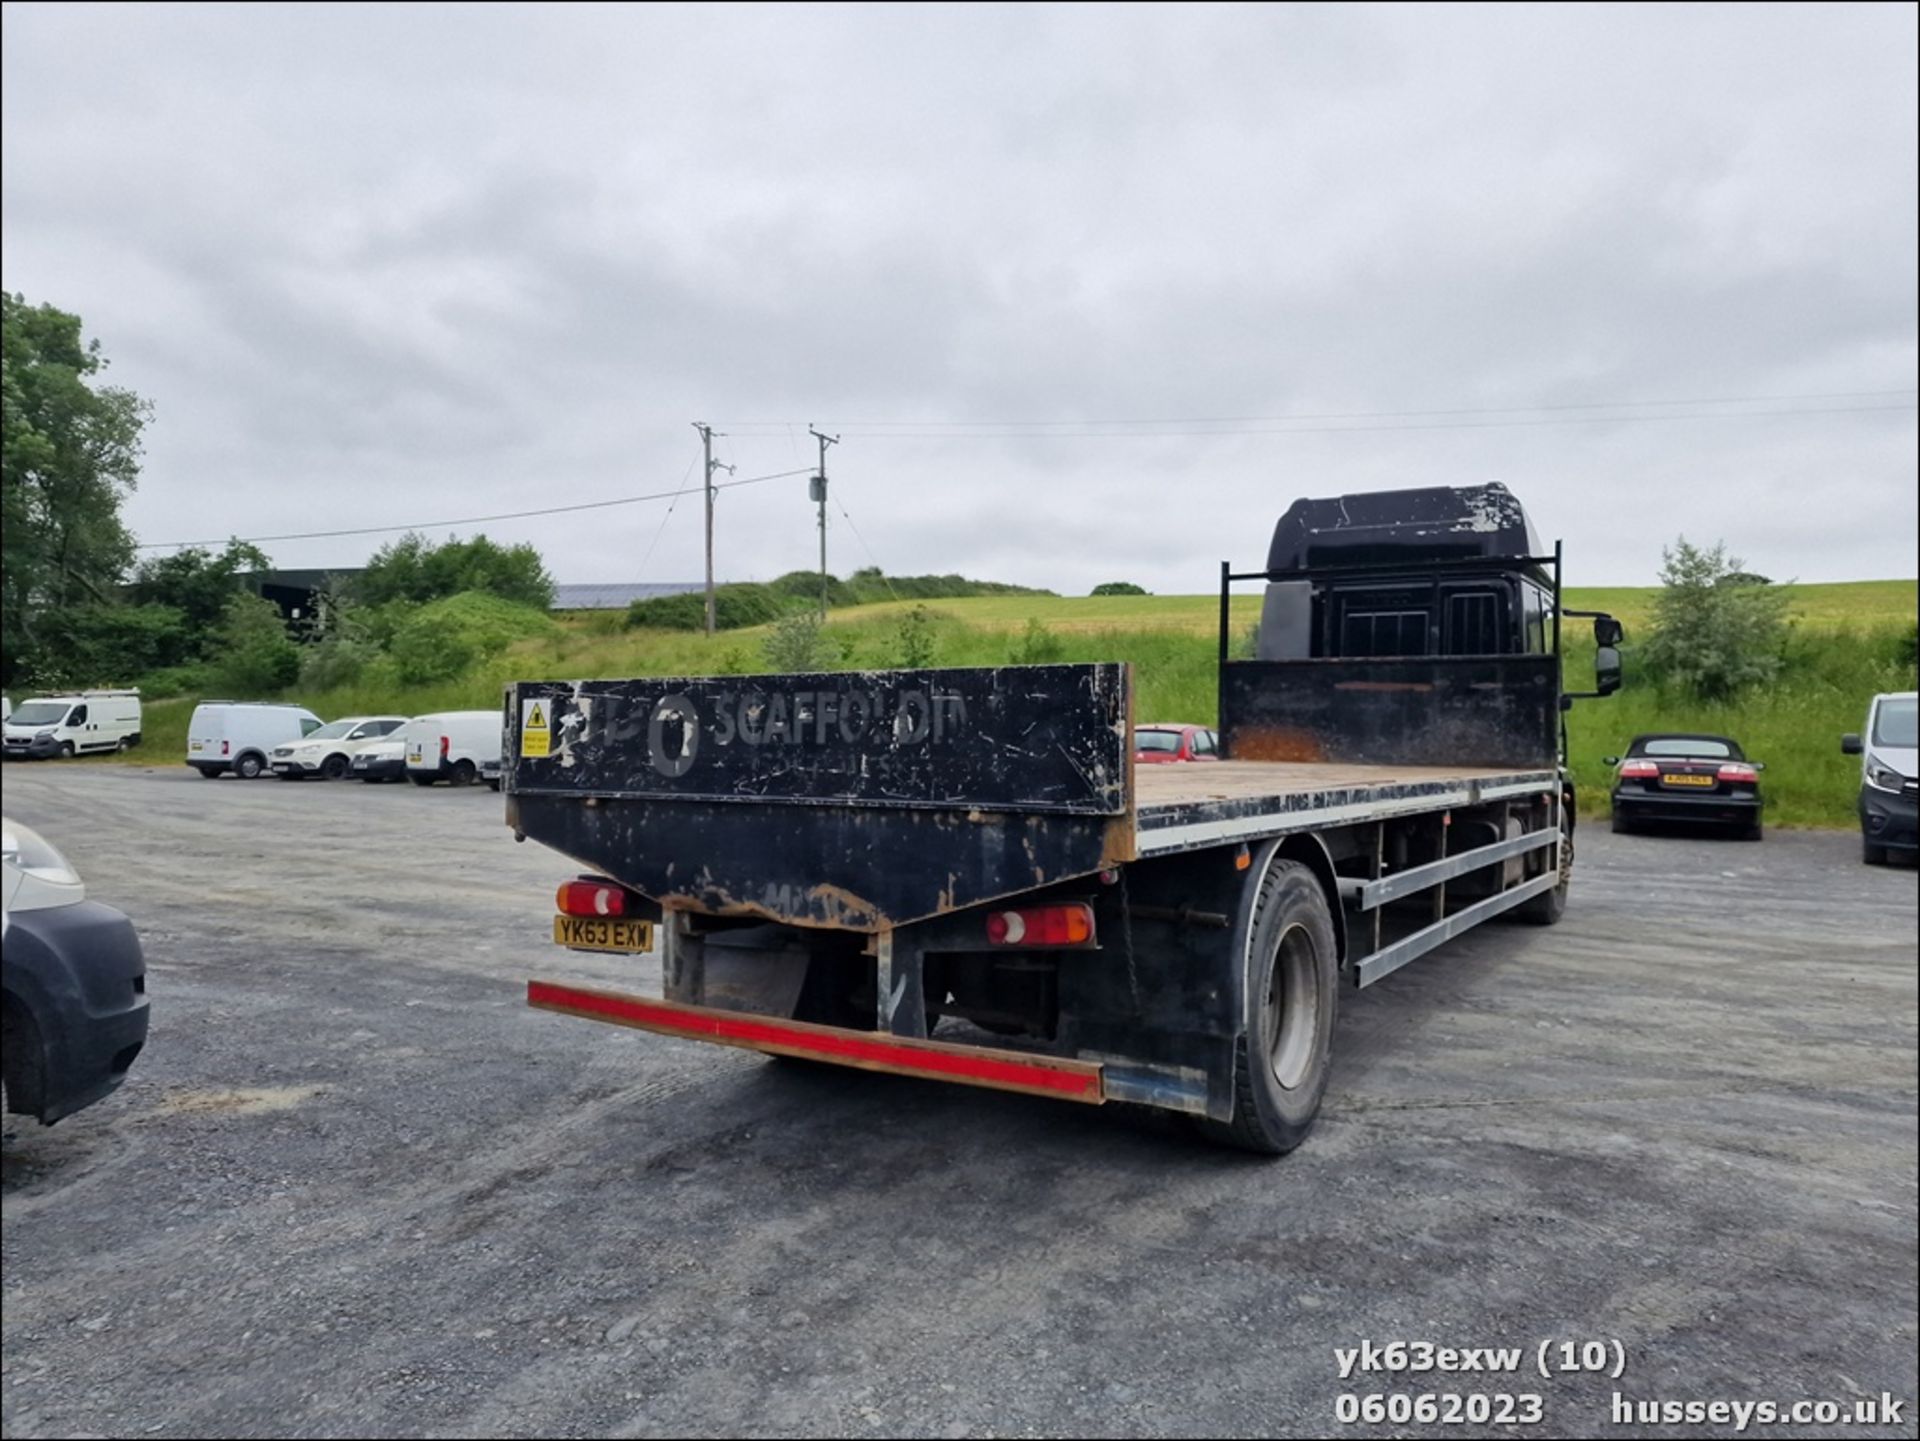 13/63 IVECO EUROCARGO (MY 2008) - 5880cc 2dr Flat Bed (Black) - Image 10 of 21